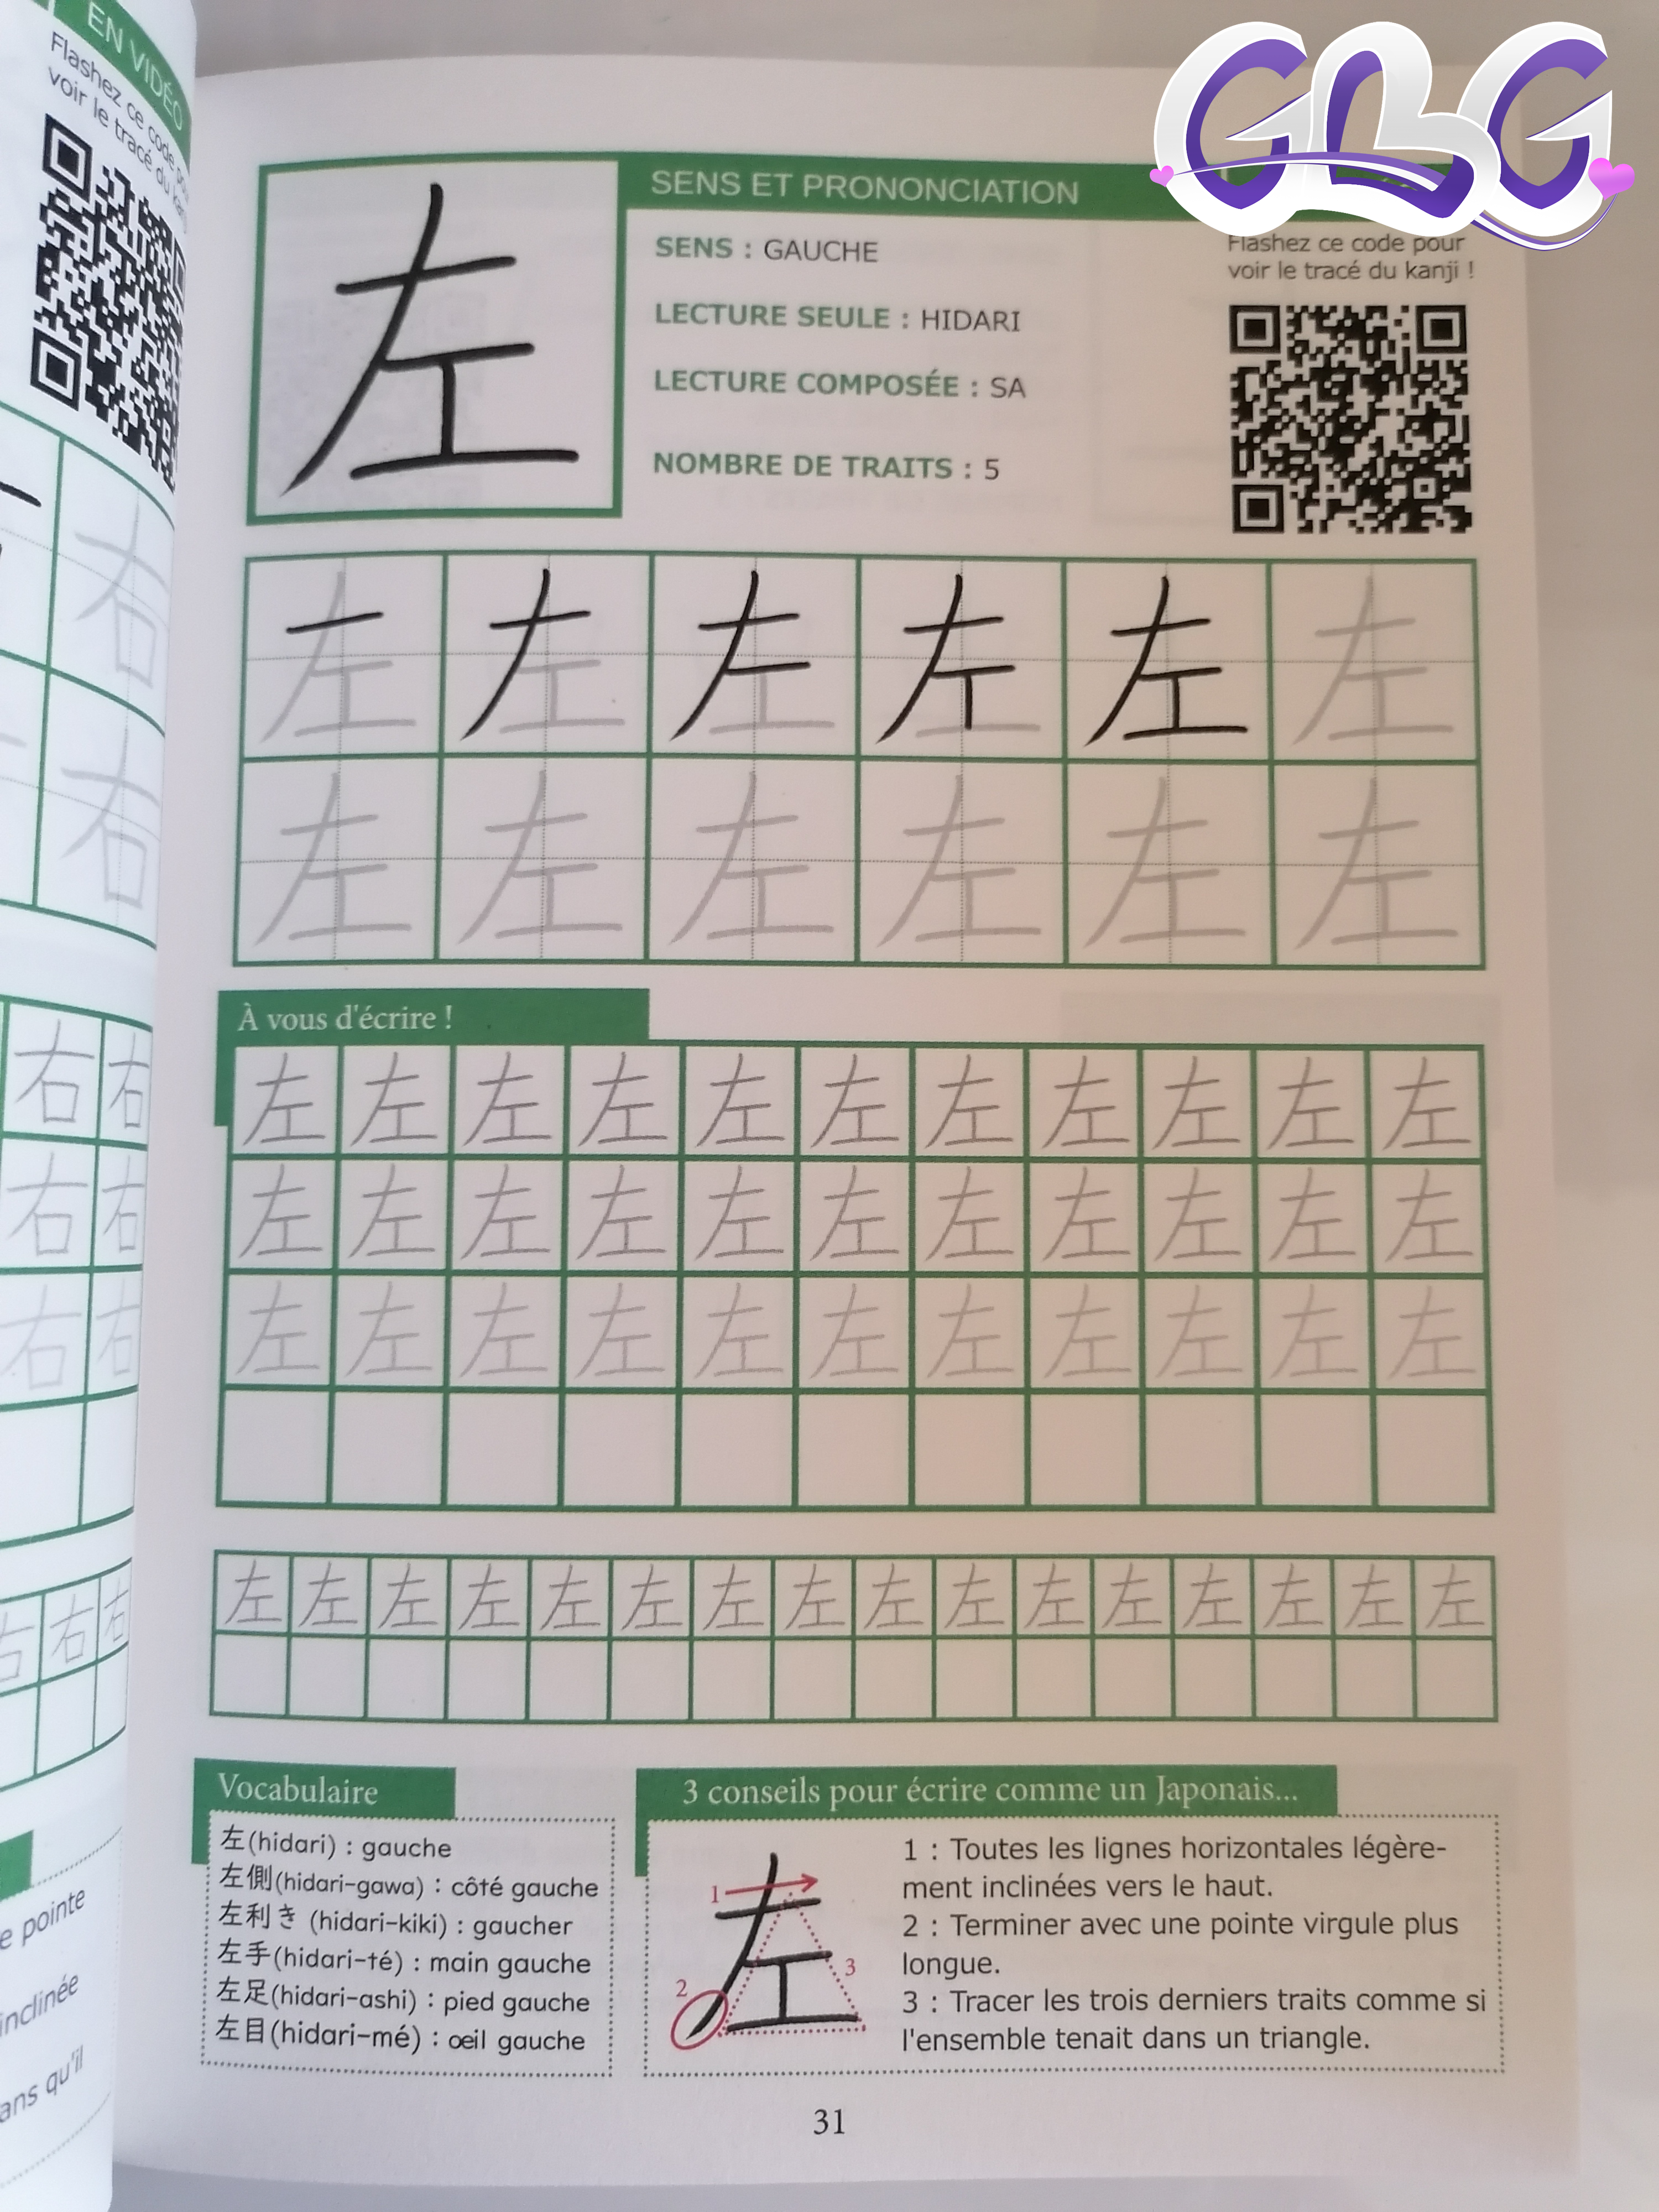 Exemple d'une page "kanji"